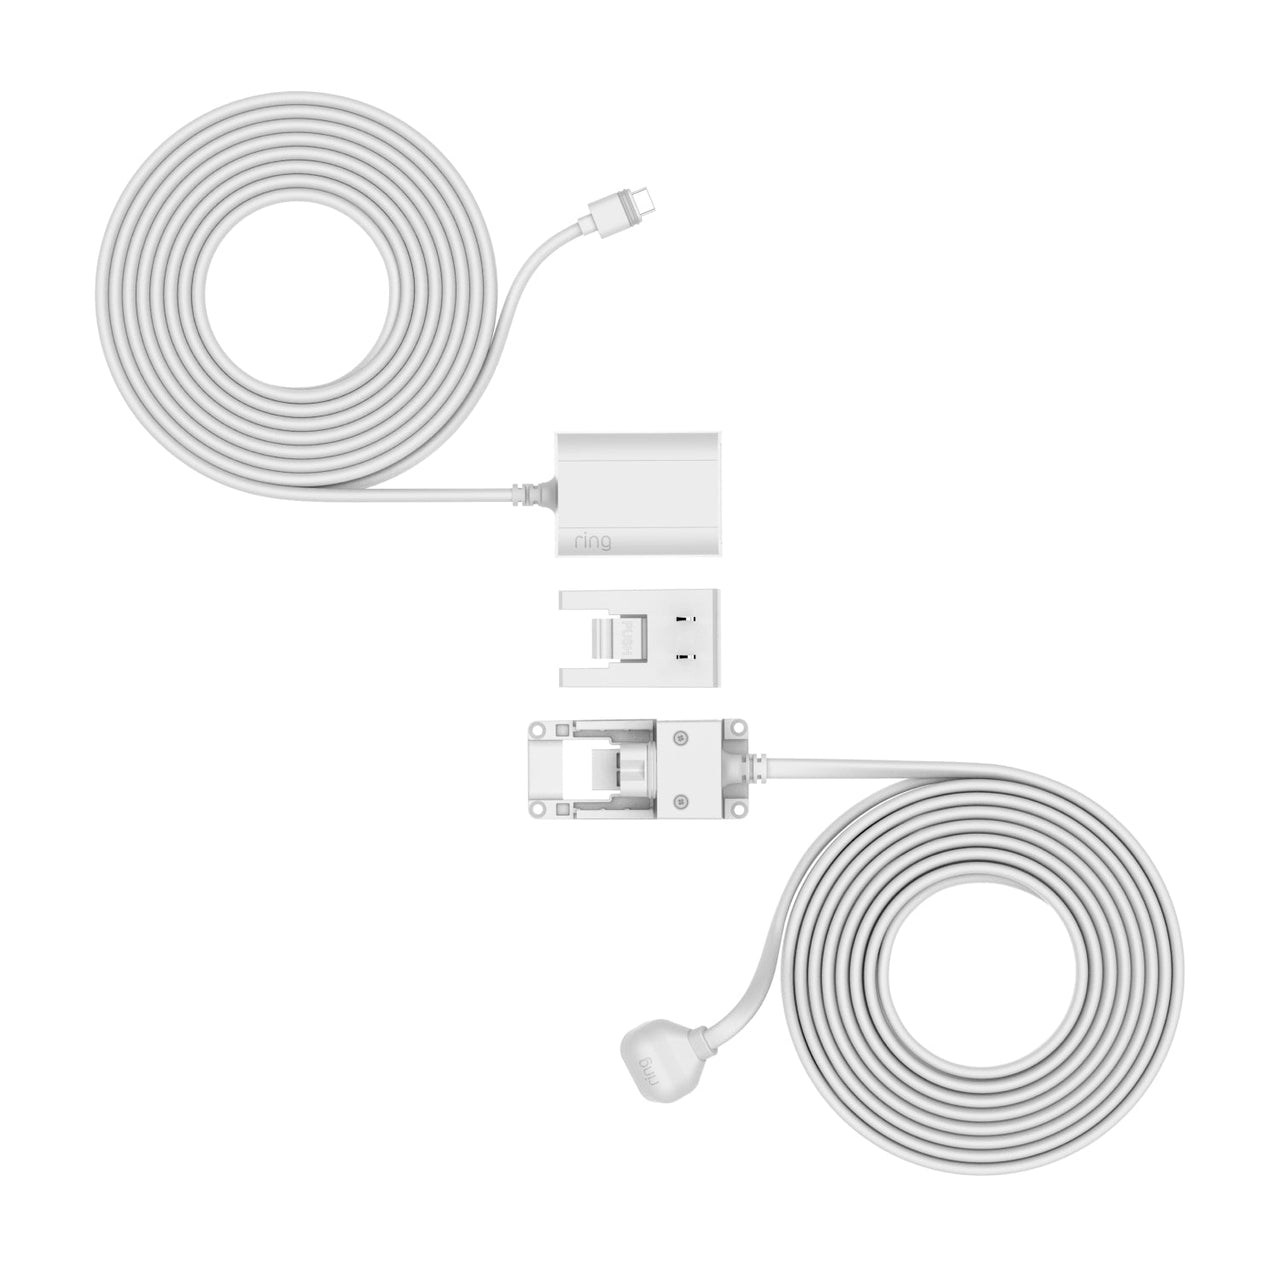 products/ring_indoor_outdoor_power_adapter_usb-c_separate_wht_1500x1500_1_b51044fc-6db9-4f8e-82c0-2d5c049339bf.jpg